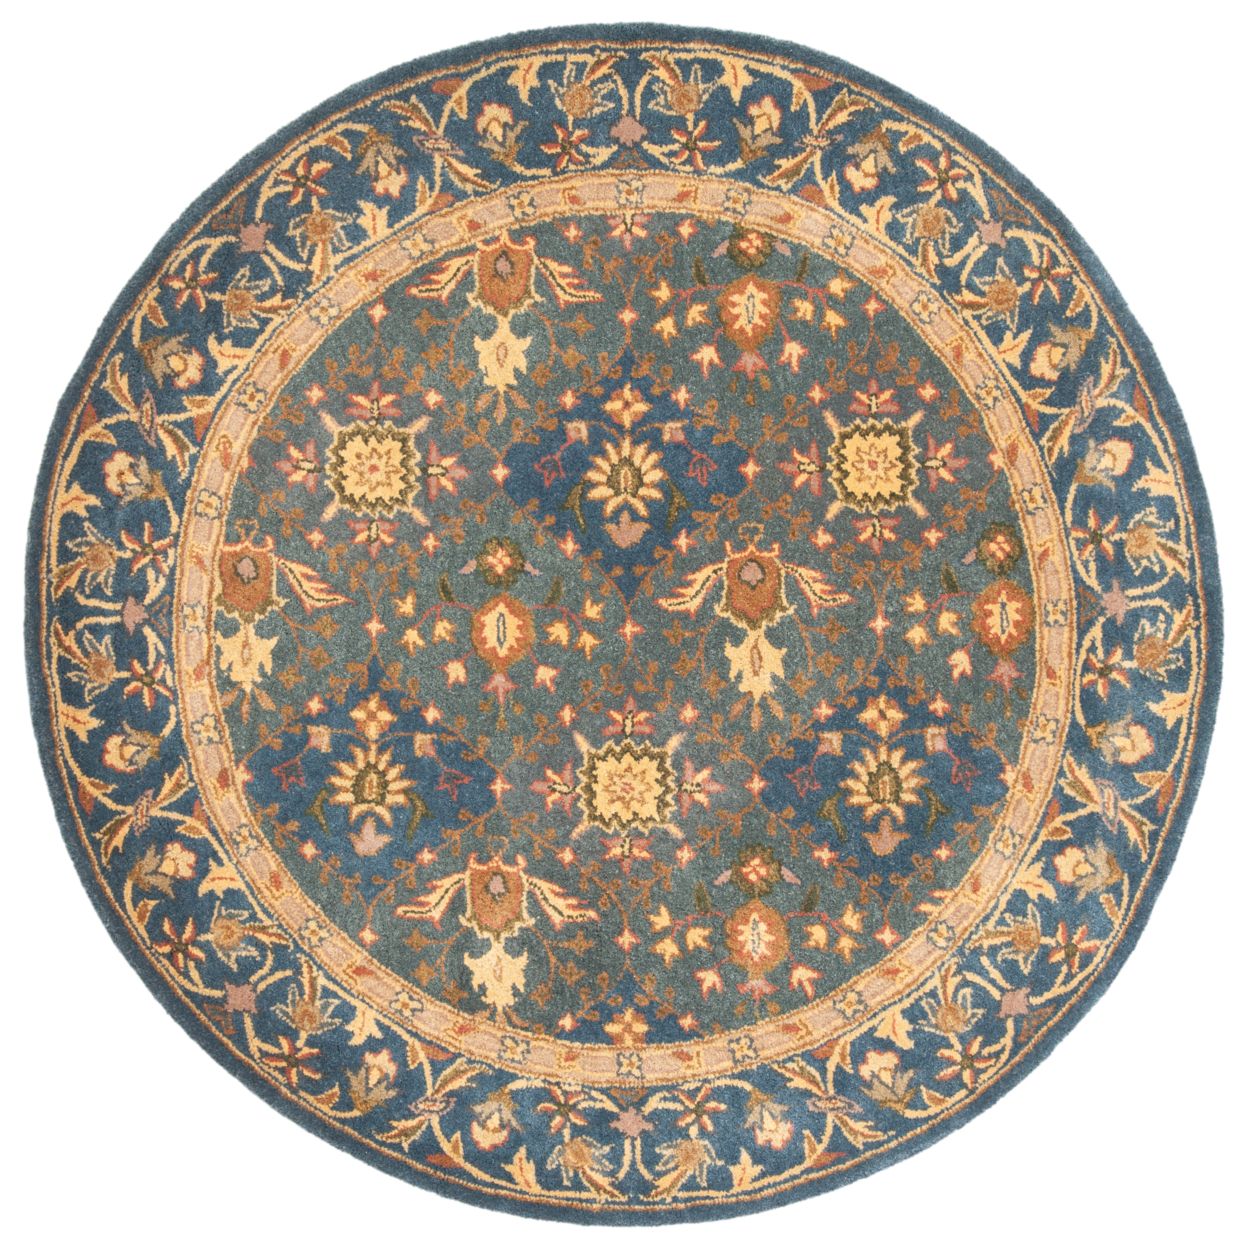 SAFAVIEH Antiquity Collection AT57A Handmade Blue Rug - 6' Round